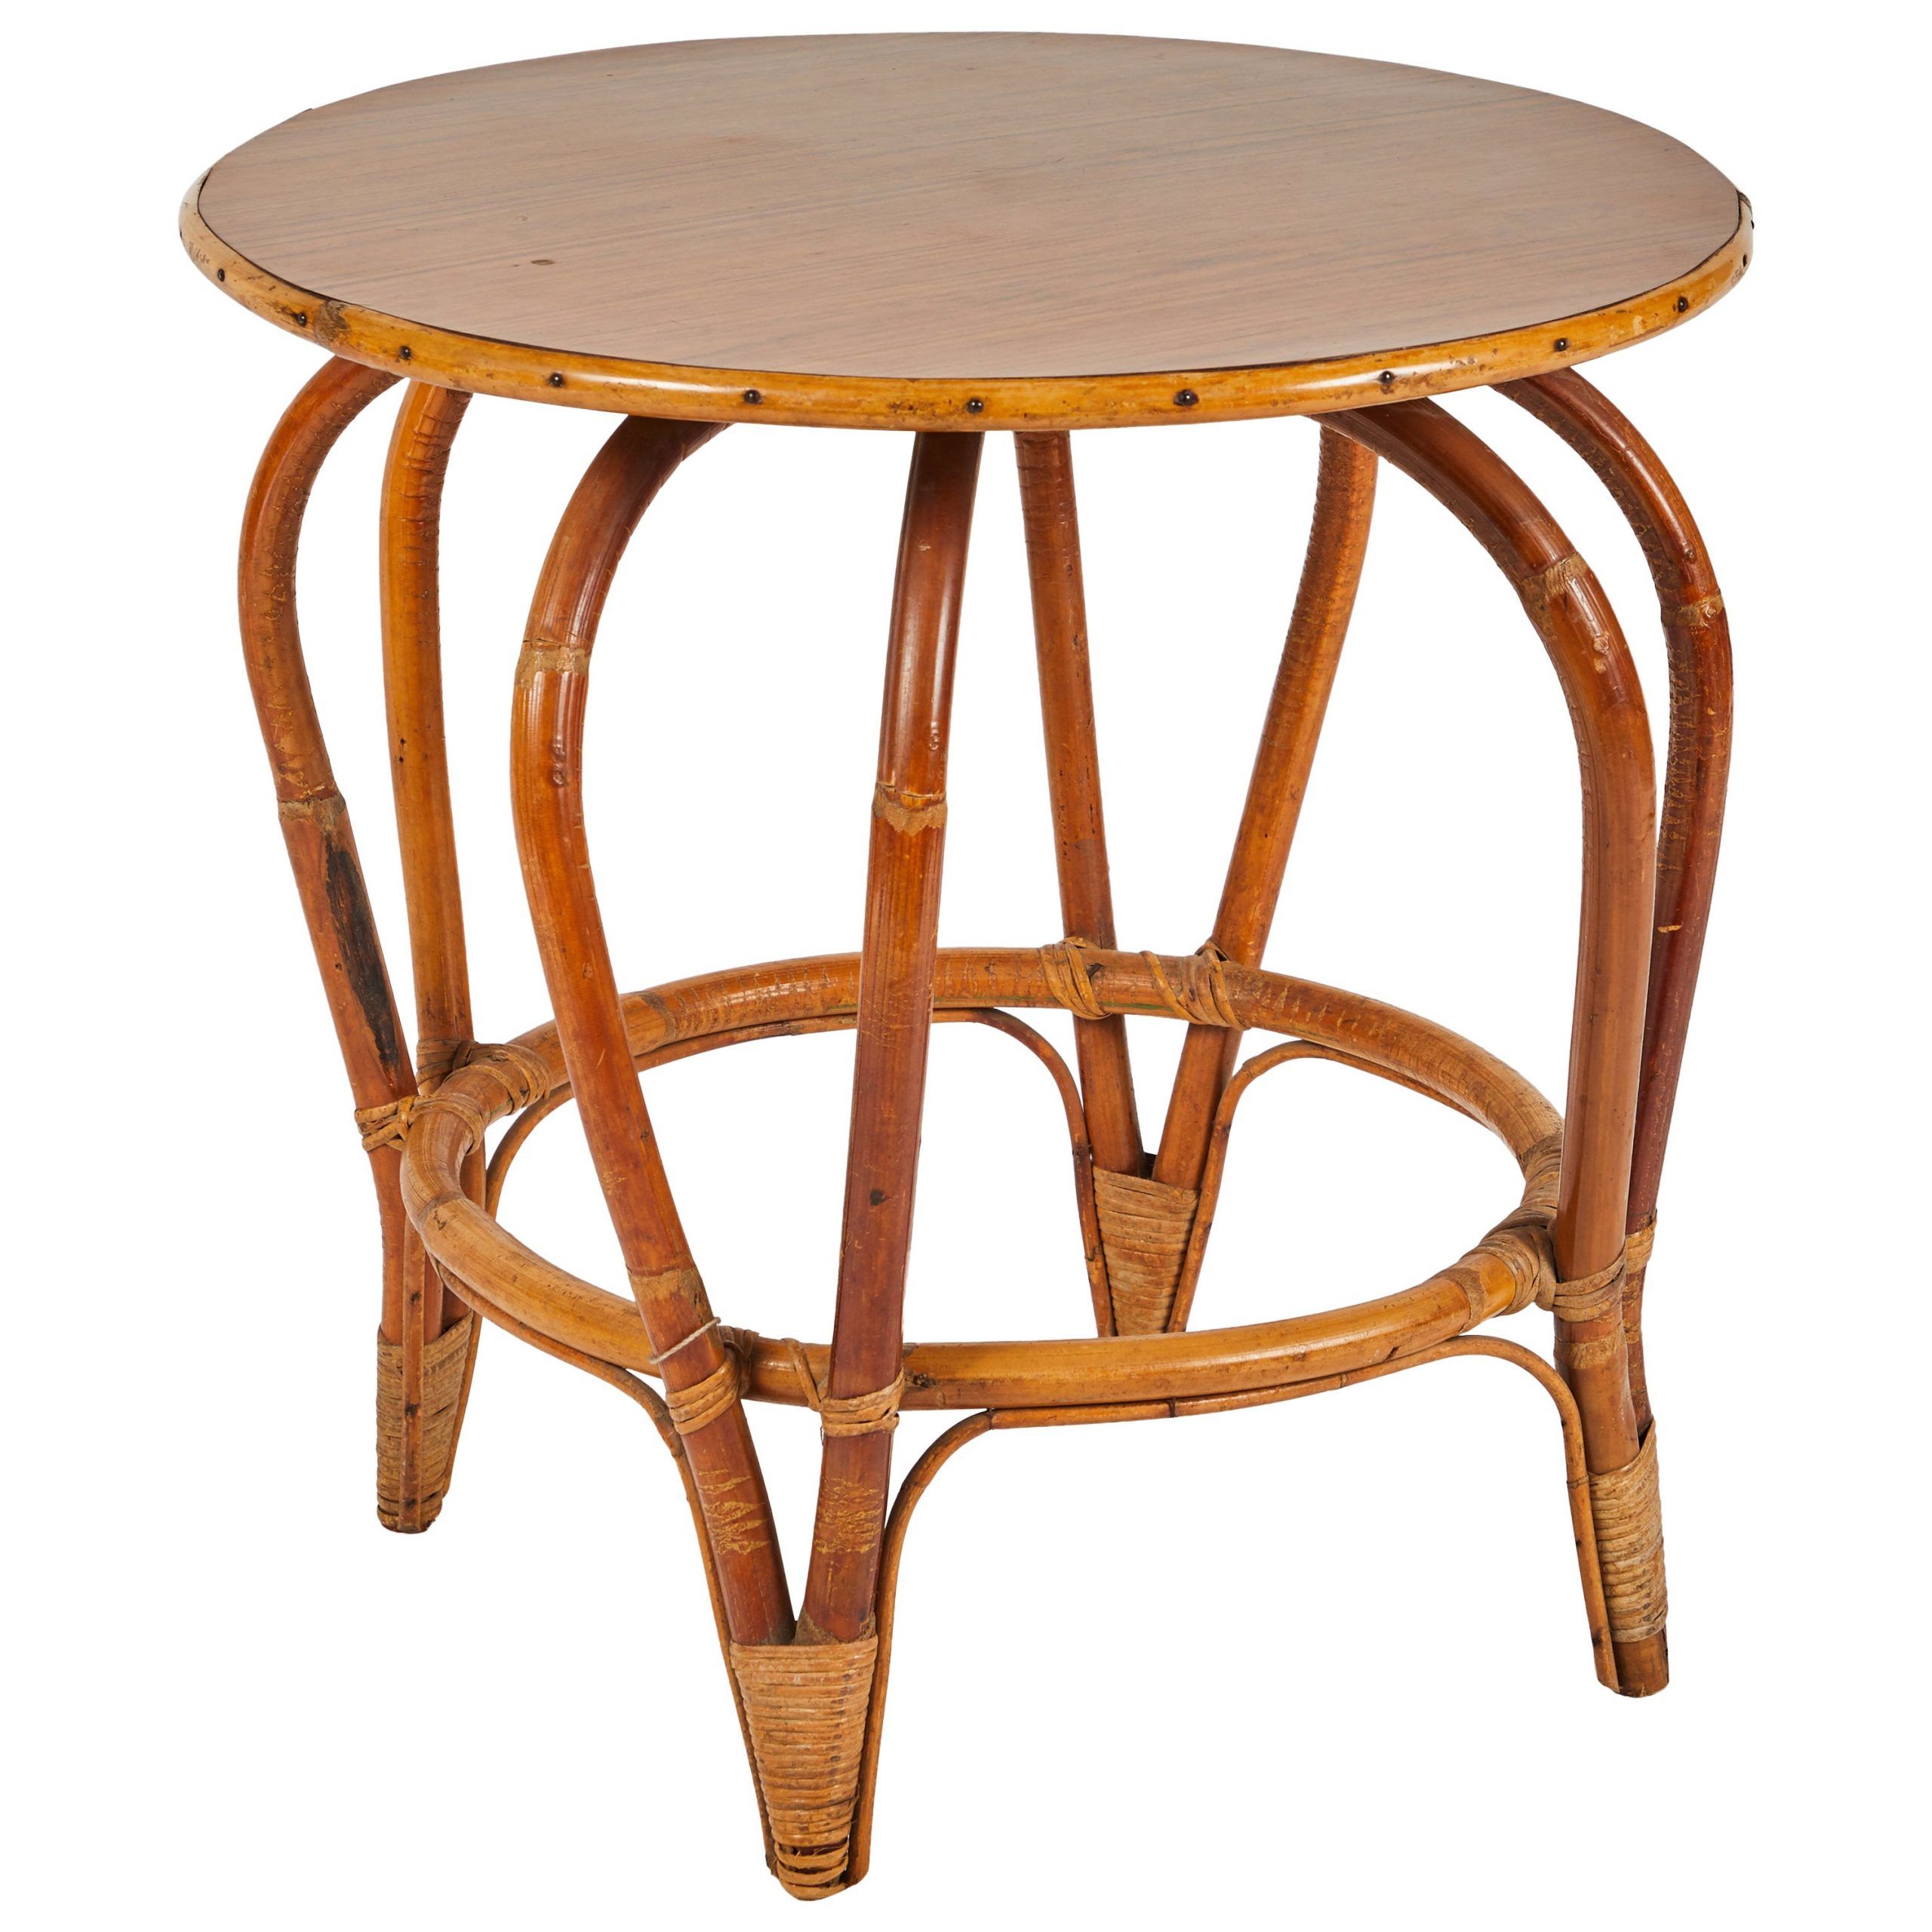 Vintage Round Rattan Drum Shape Coffee Or End Table With Regarding Most Up To Date Light Natural Drum Coffee Tables (Gallery 16 of 20)